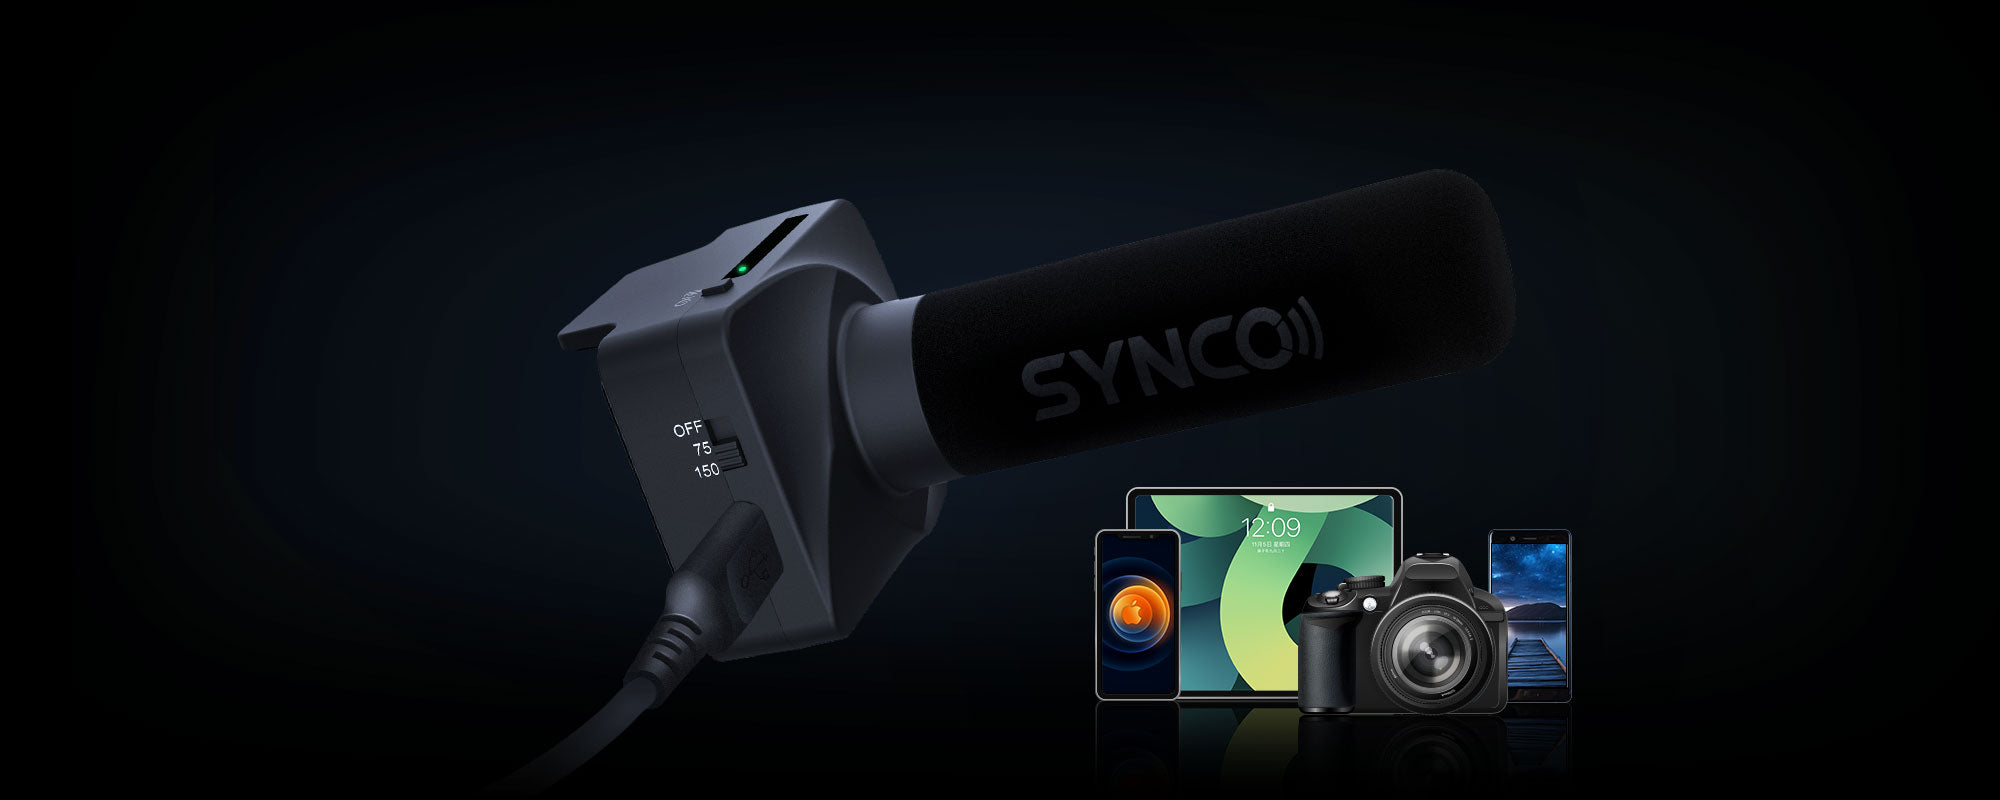 SYNCO U3 is a directional microphone for cell phone, tablet, and DSLR camera.